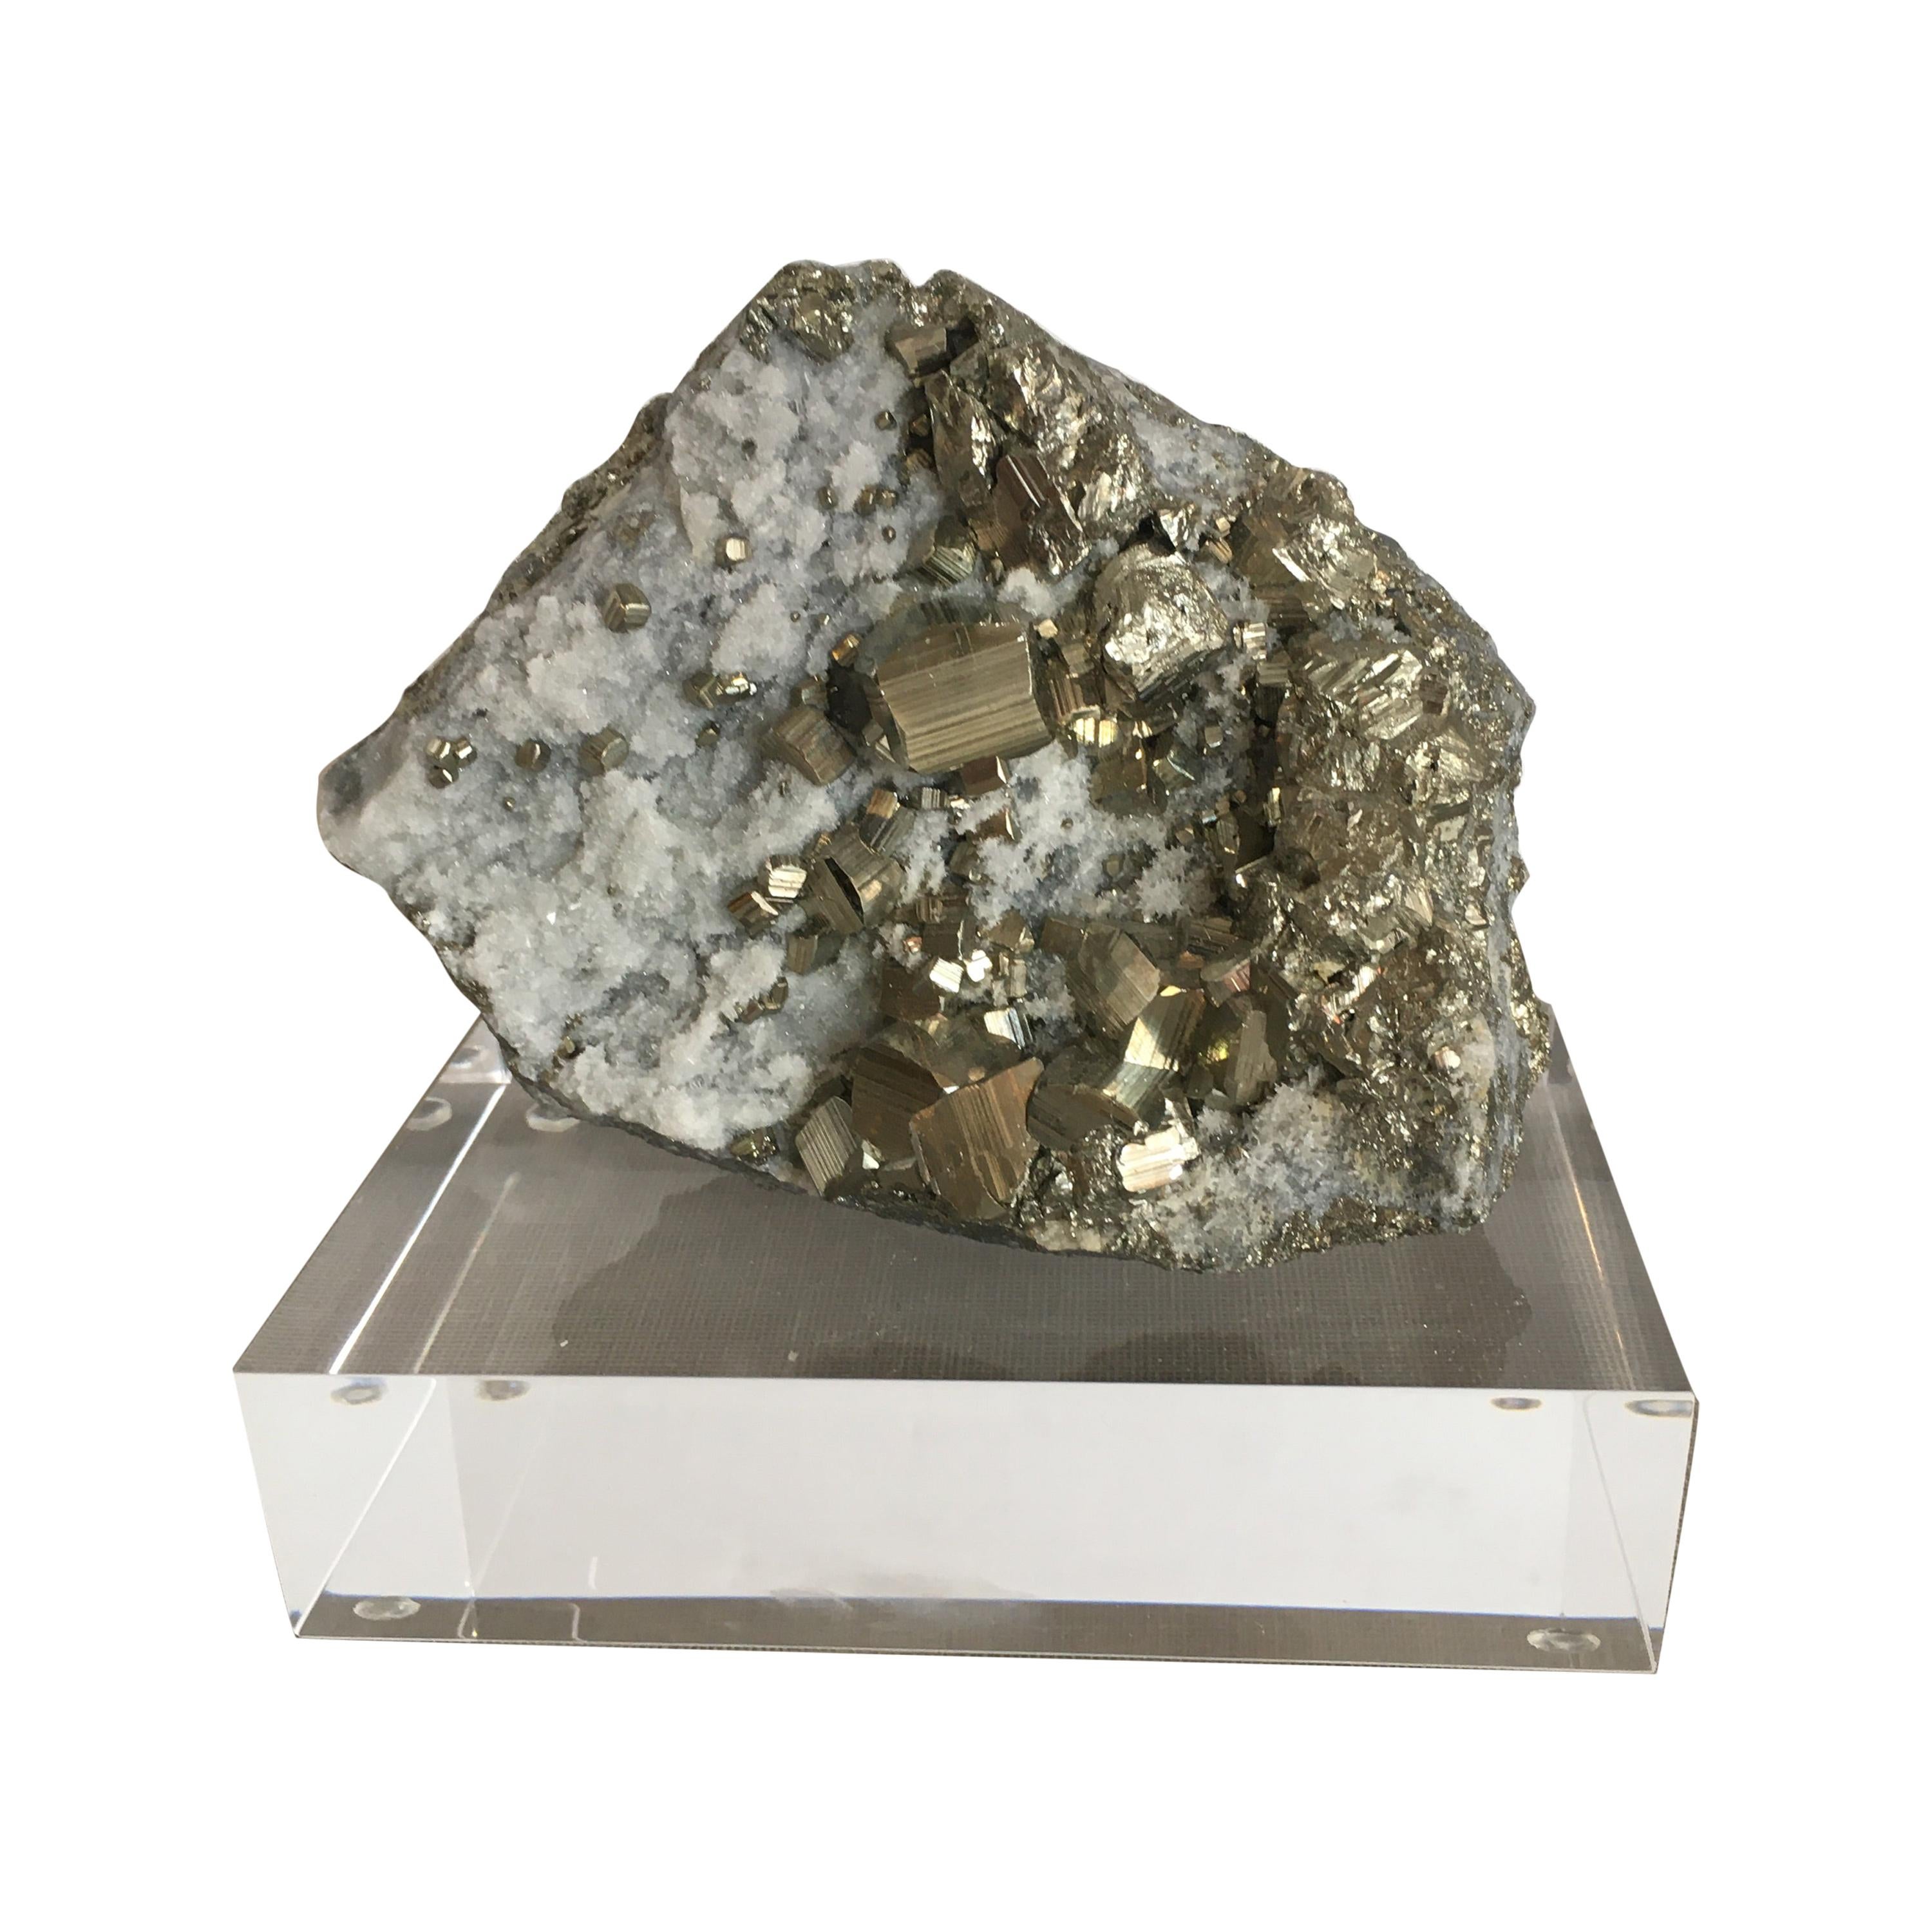 Pyrite with Quartz Crystals on a Lucite Base